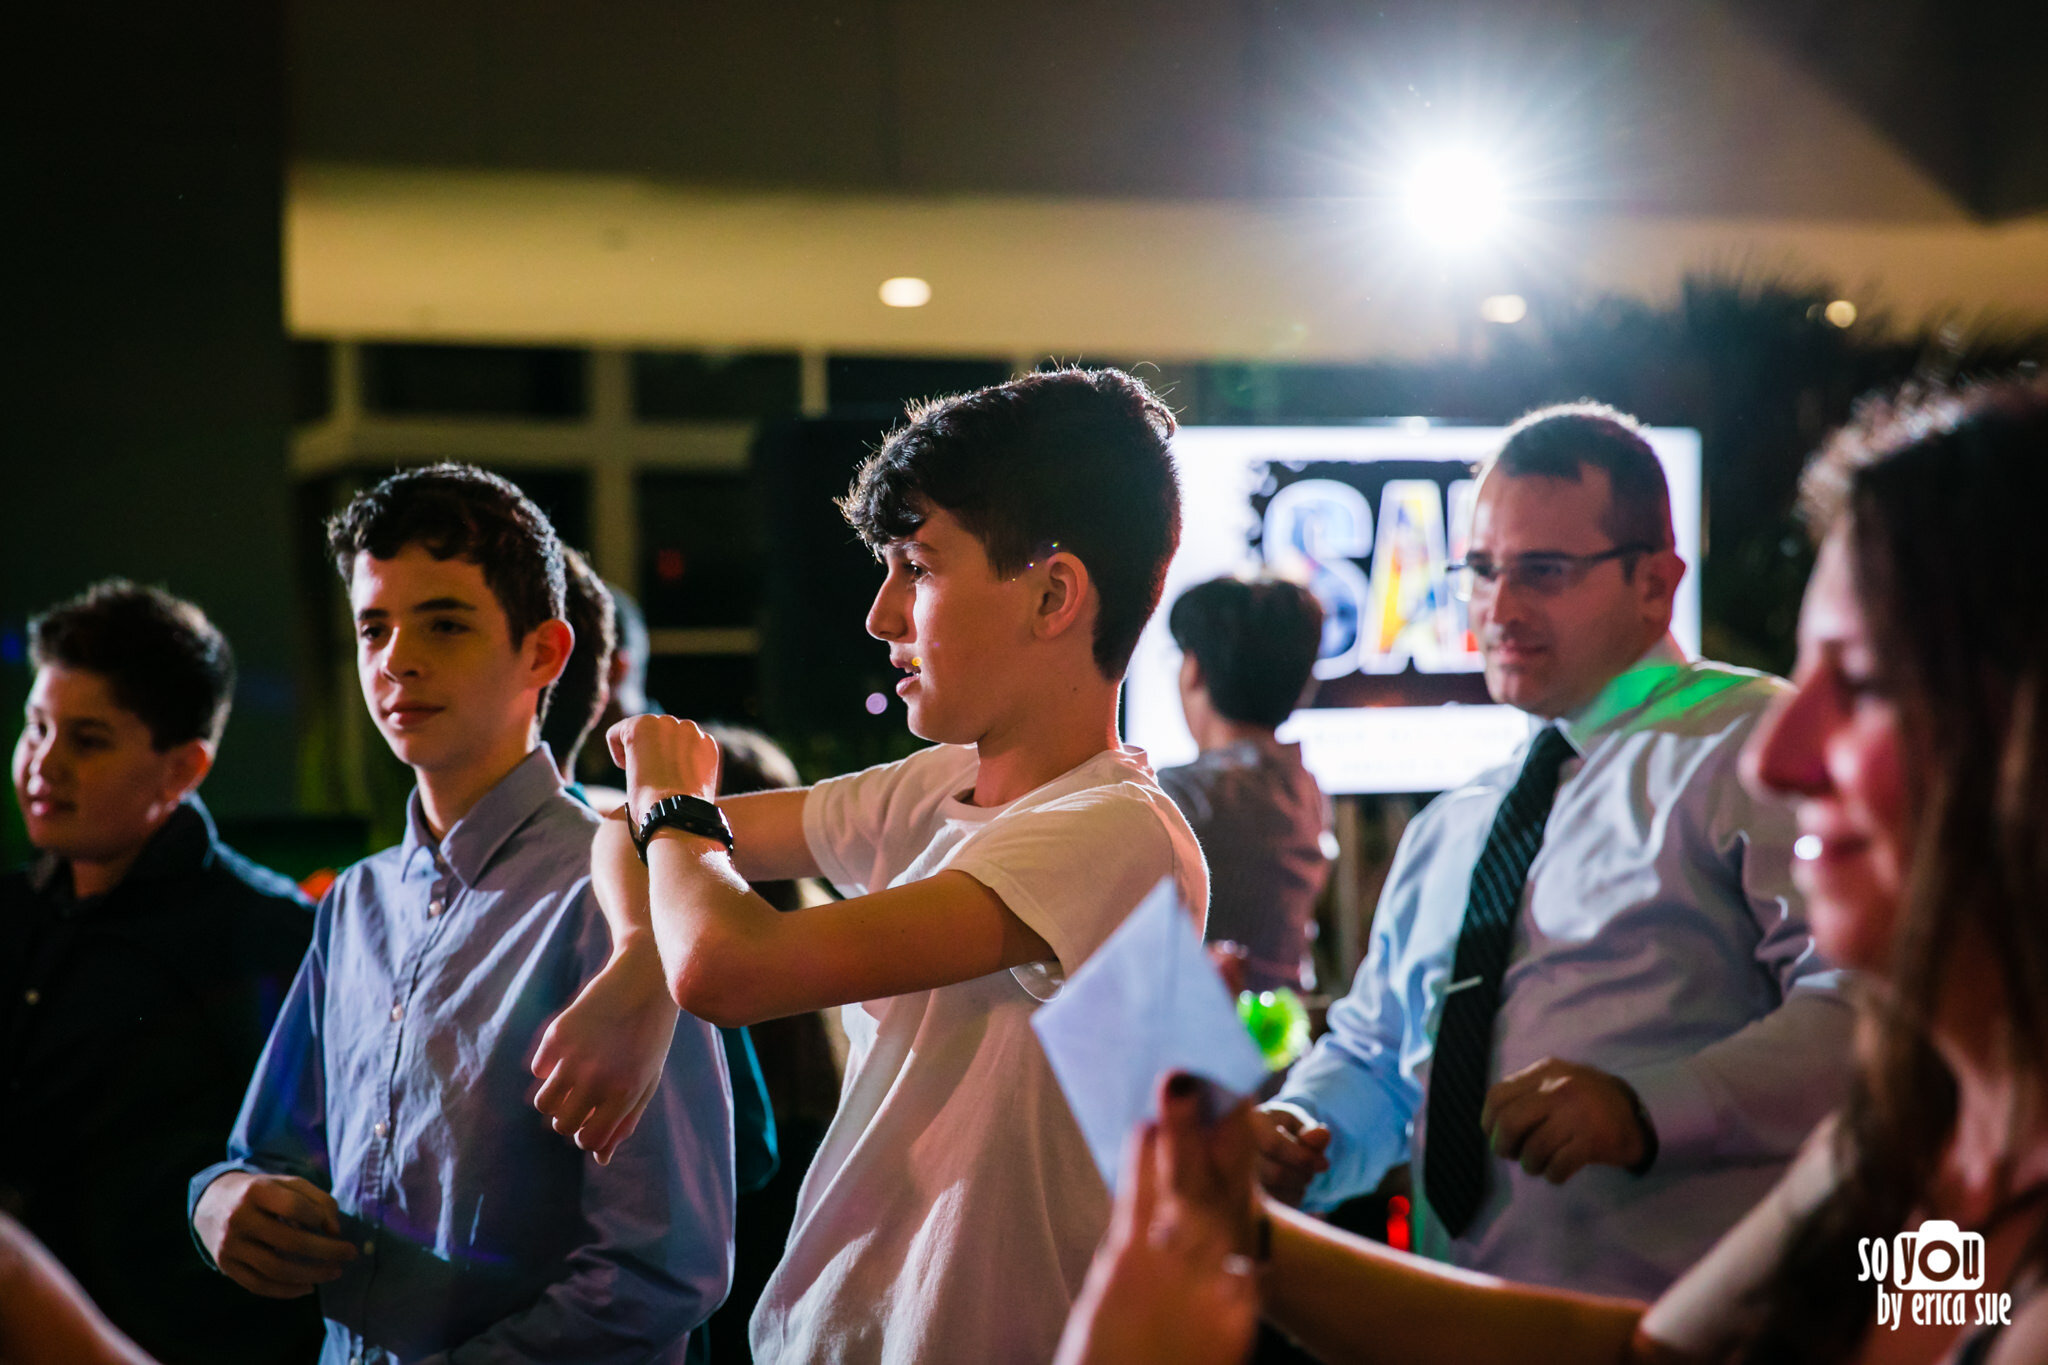 78-so-you-by-erica-sue-bar-mitzvah-photographer-boca-pavilion-grille-6664.JPG